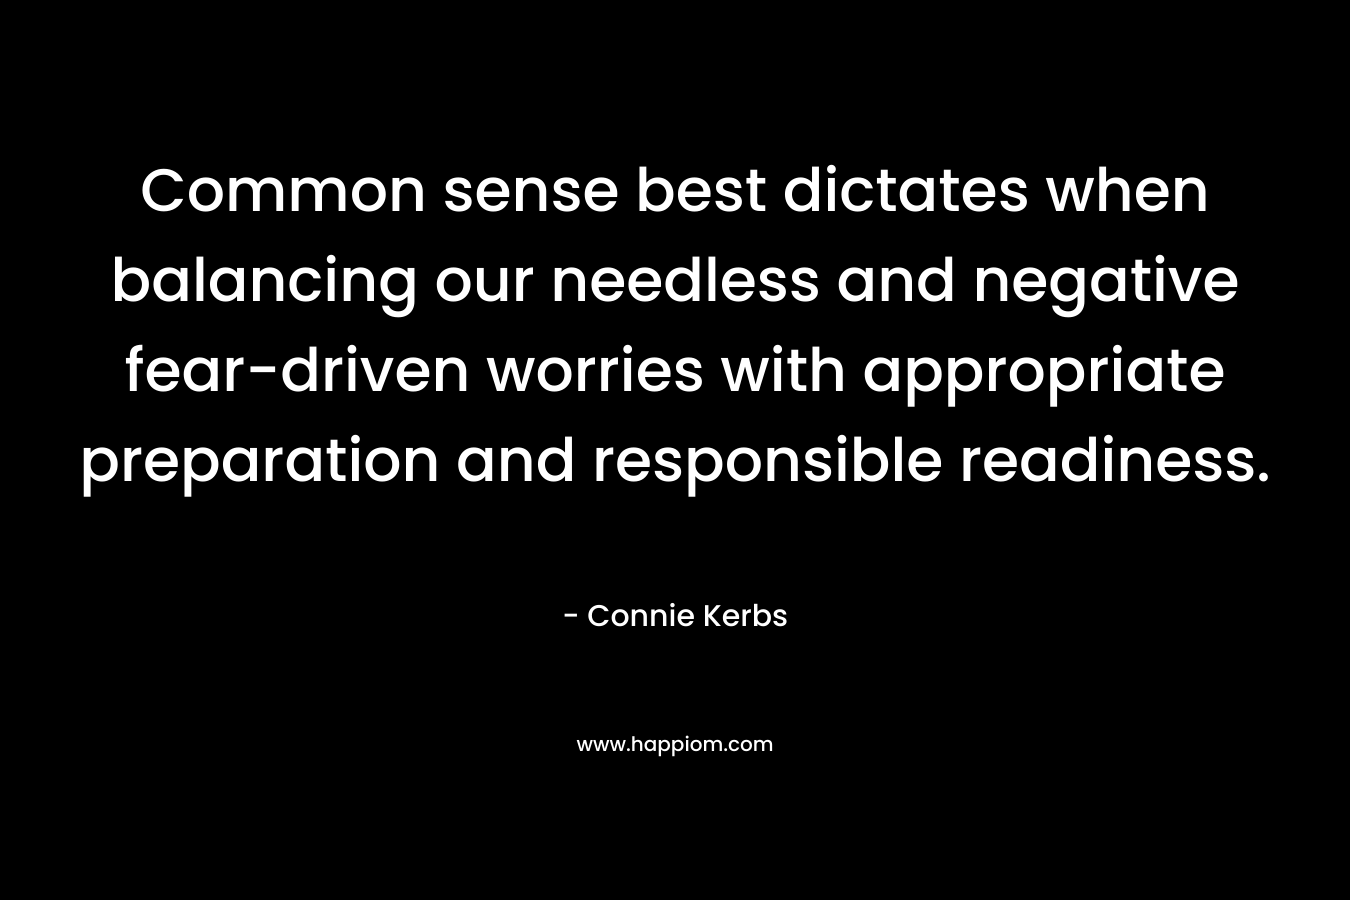 Common sense best dictates when balancing our needless and negative fear-driven worries with appropriate preparation and responsible readiness.